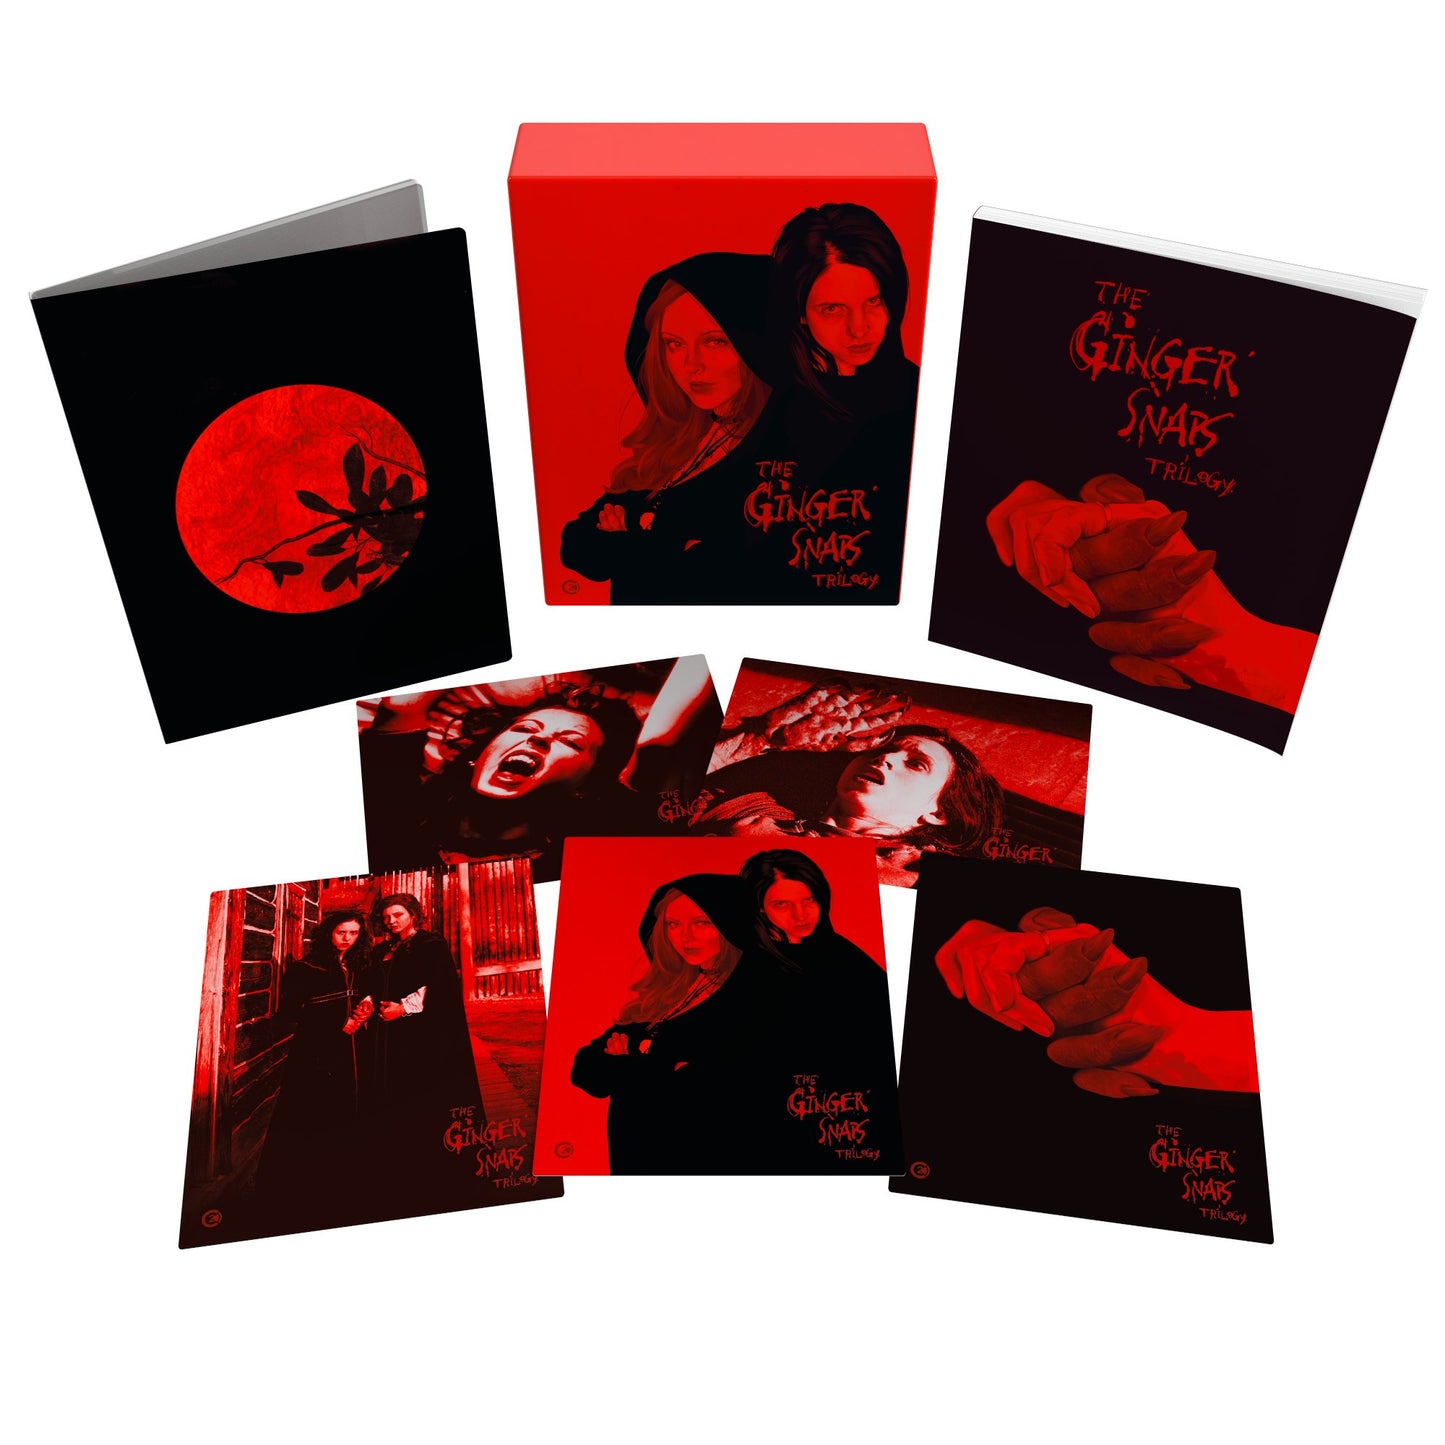 The Ginger Snaps Trilogy Limited Edition Second Sight Blu-Ray Box Set [PRE-ORDER]